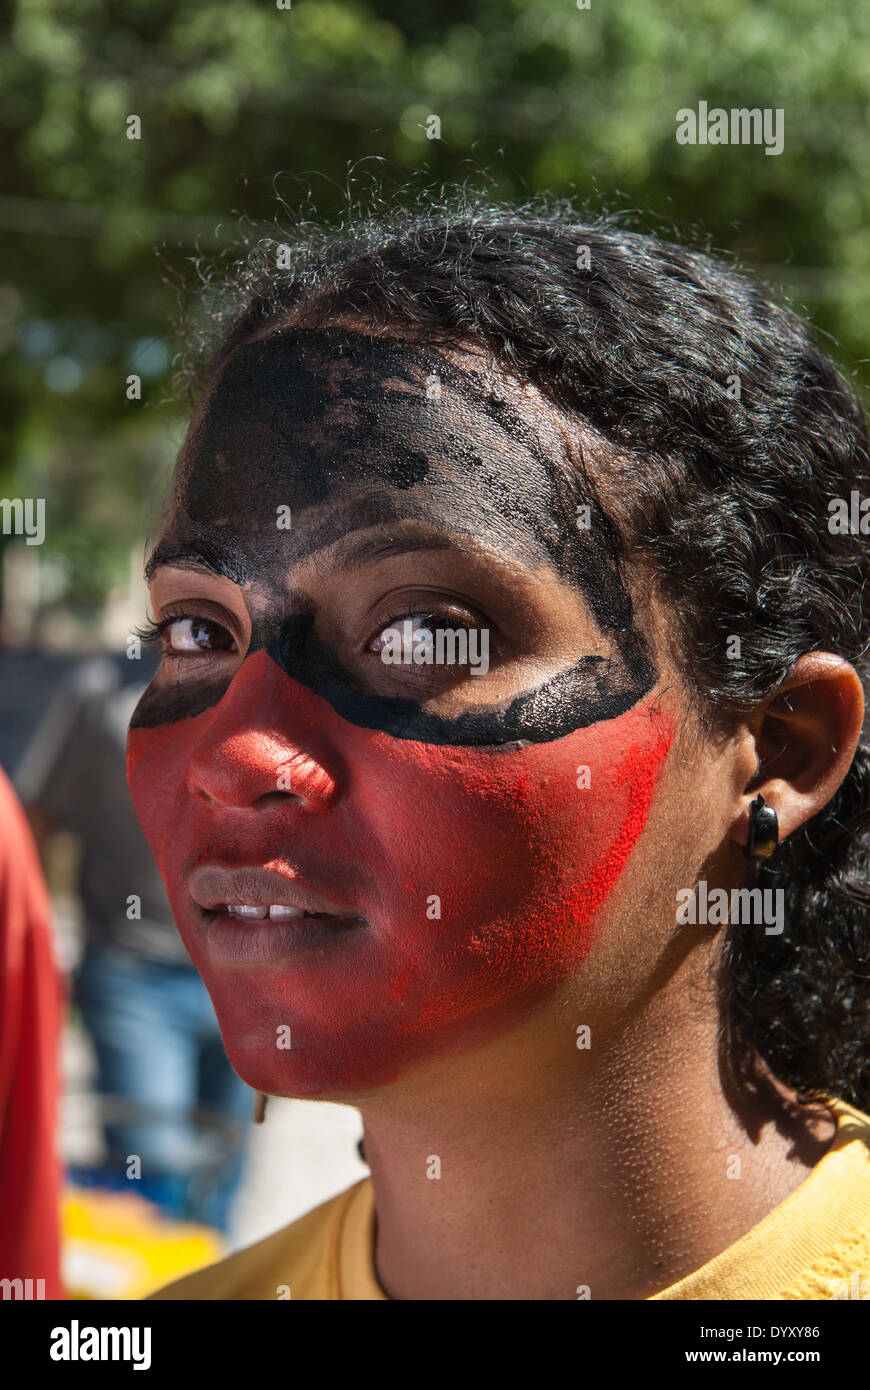 Belem, Para State, Brazil. Demonstration against the construction of hydroelectric dams. Stock Photo